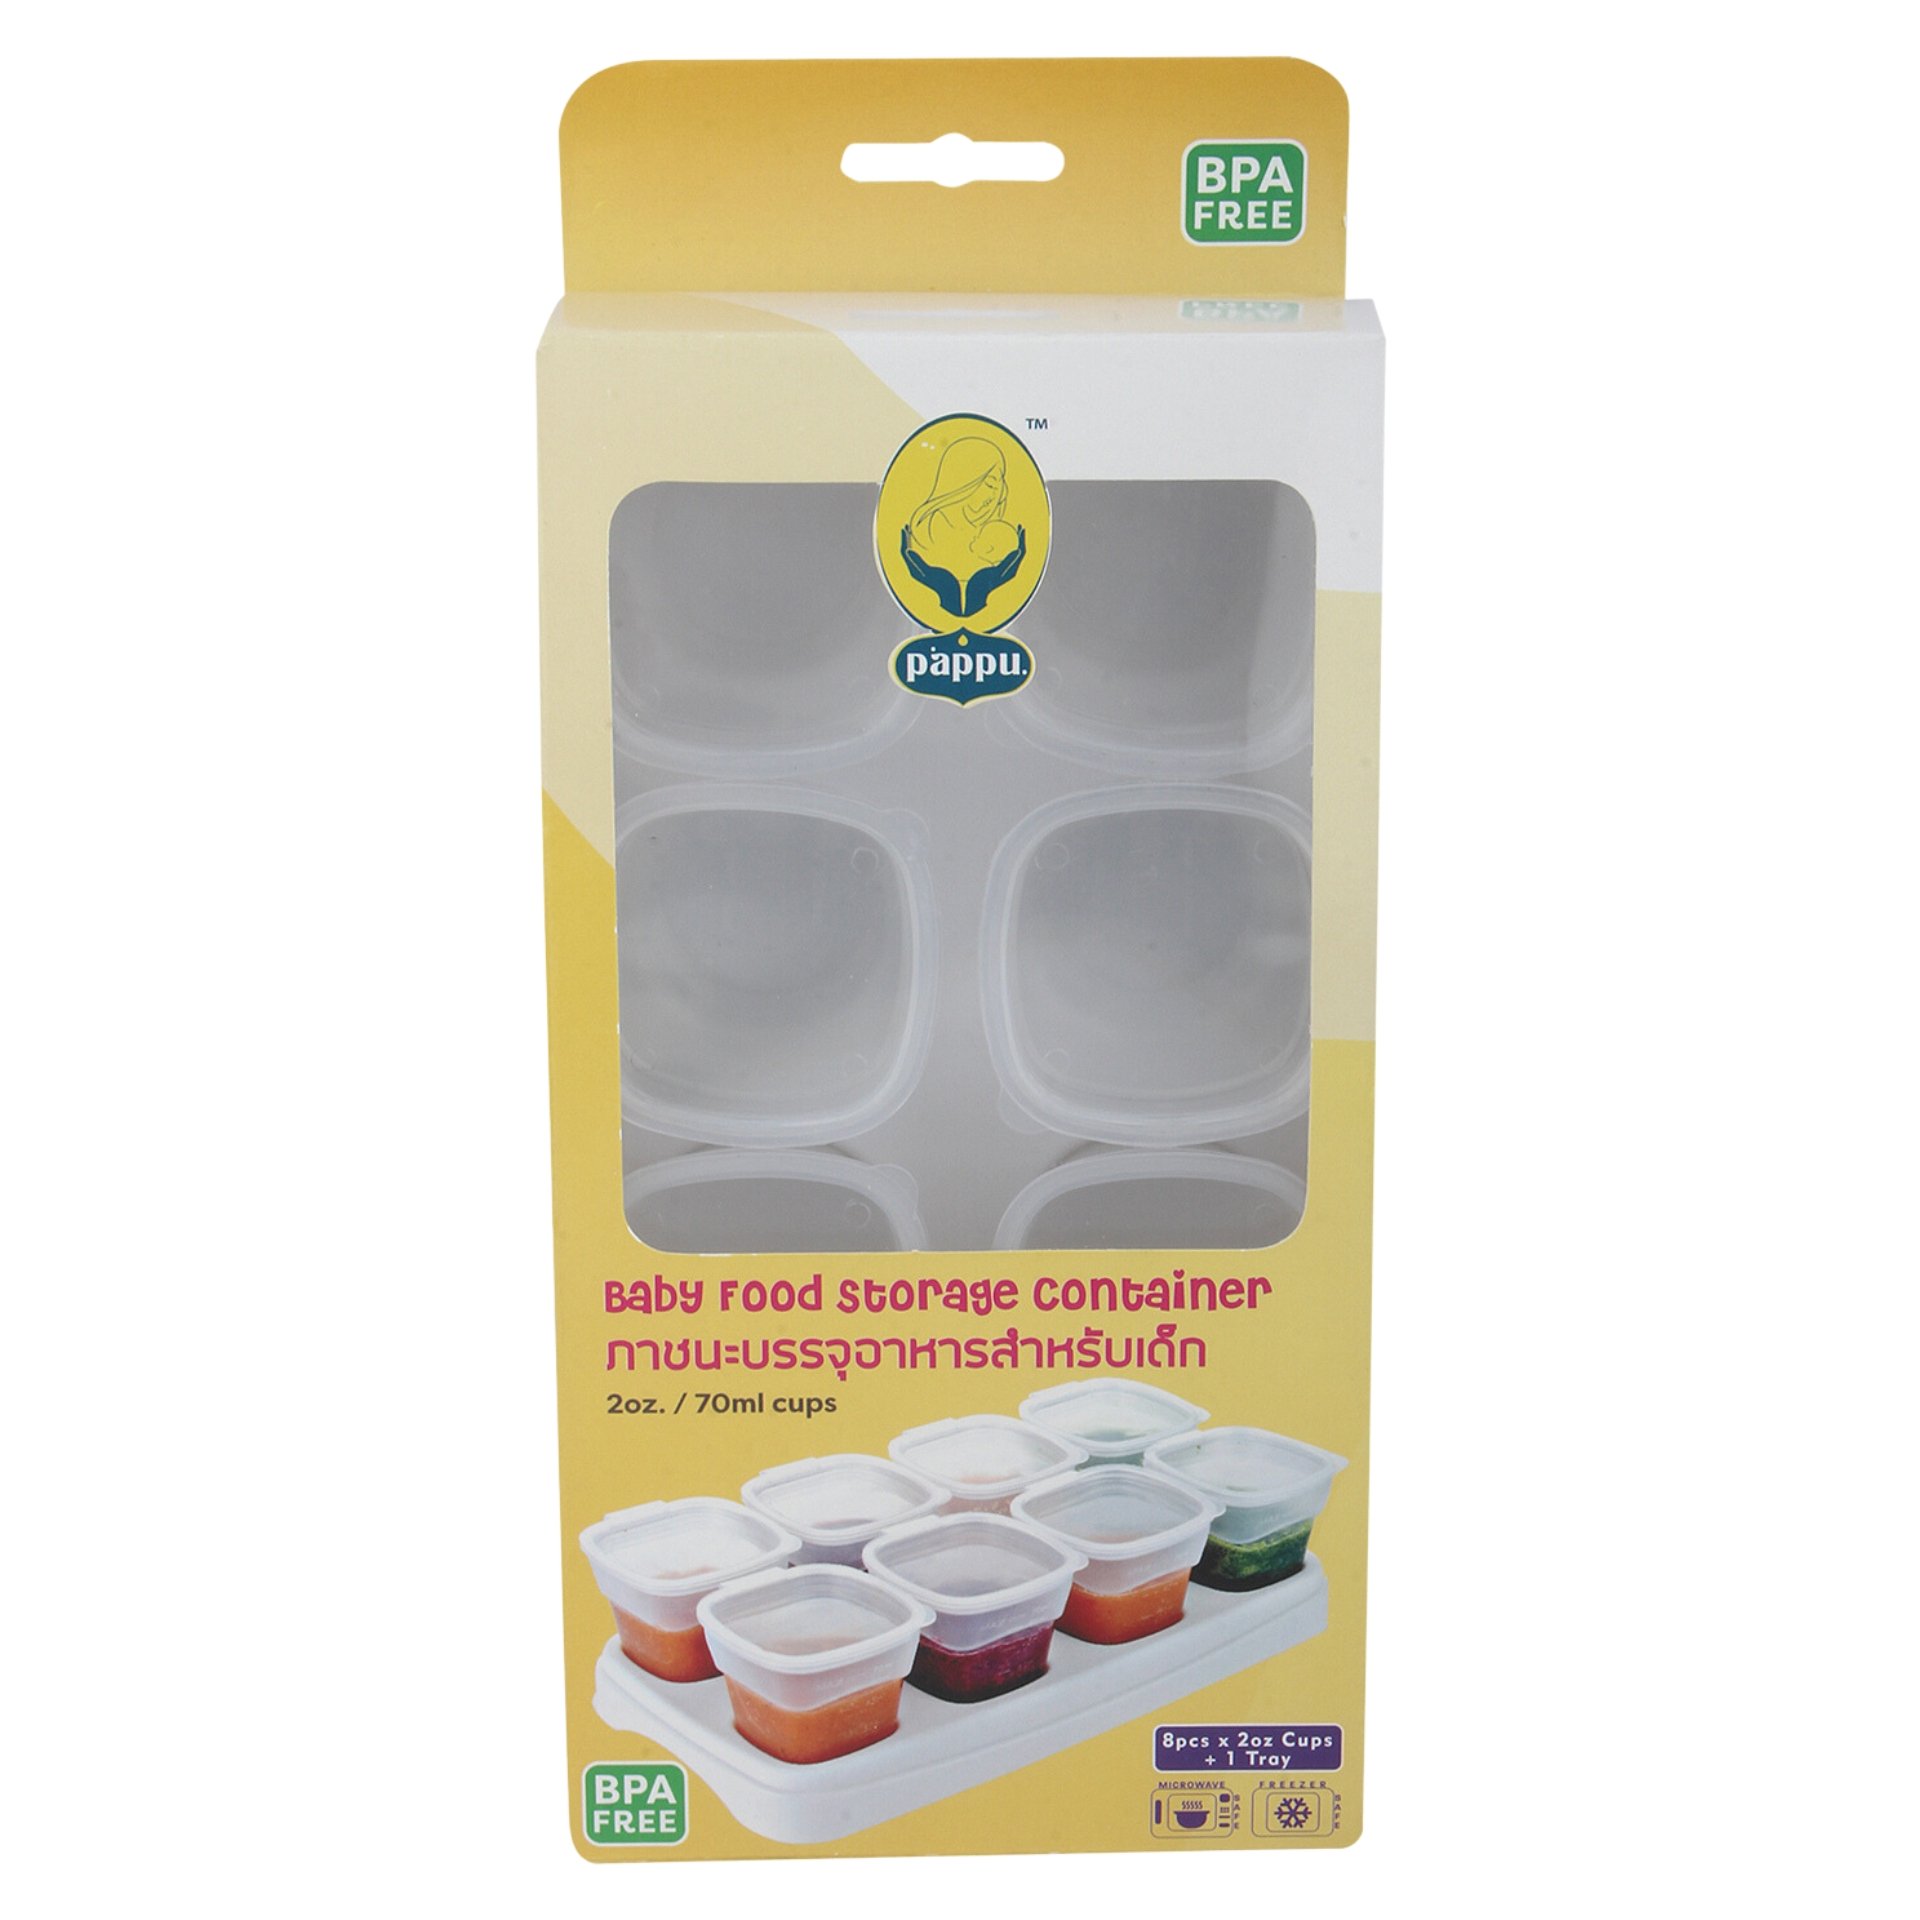 Baby food storage container 8pcsx2oz cups+tray